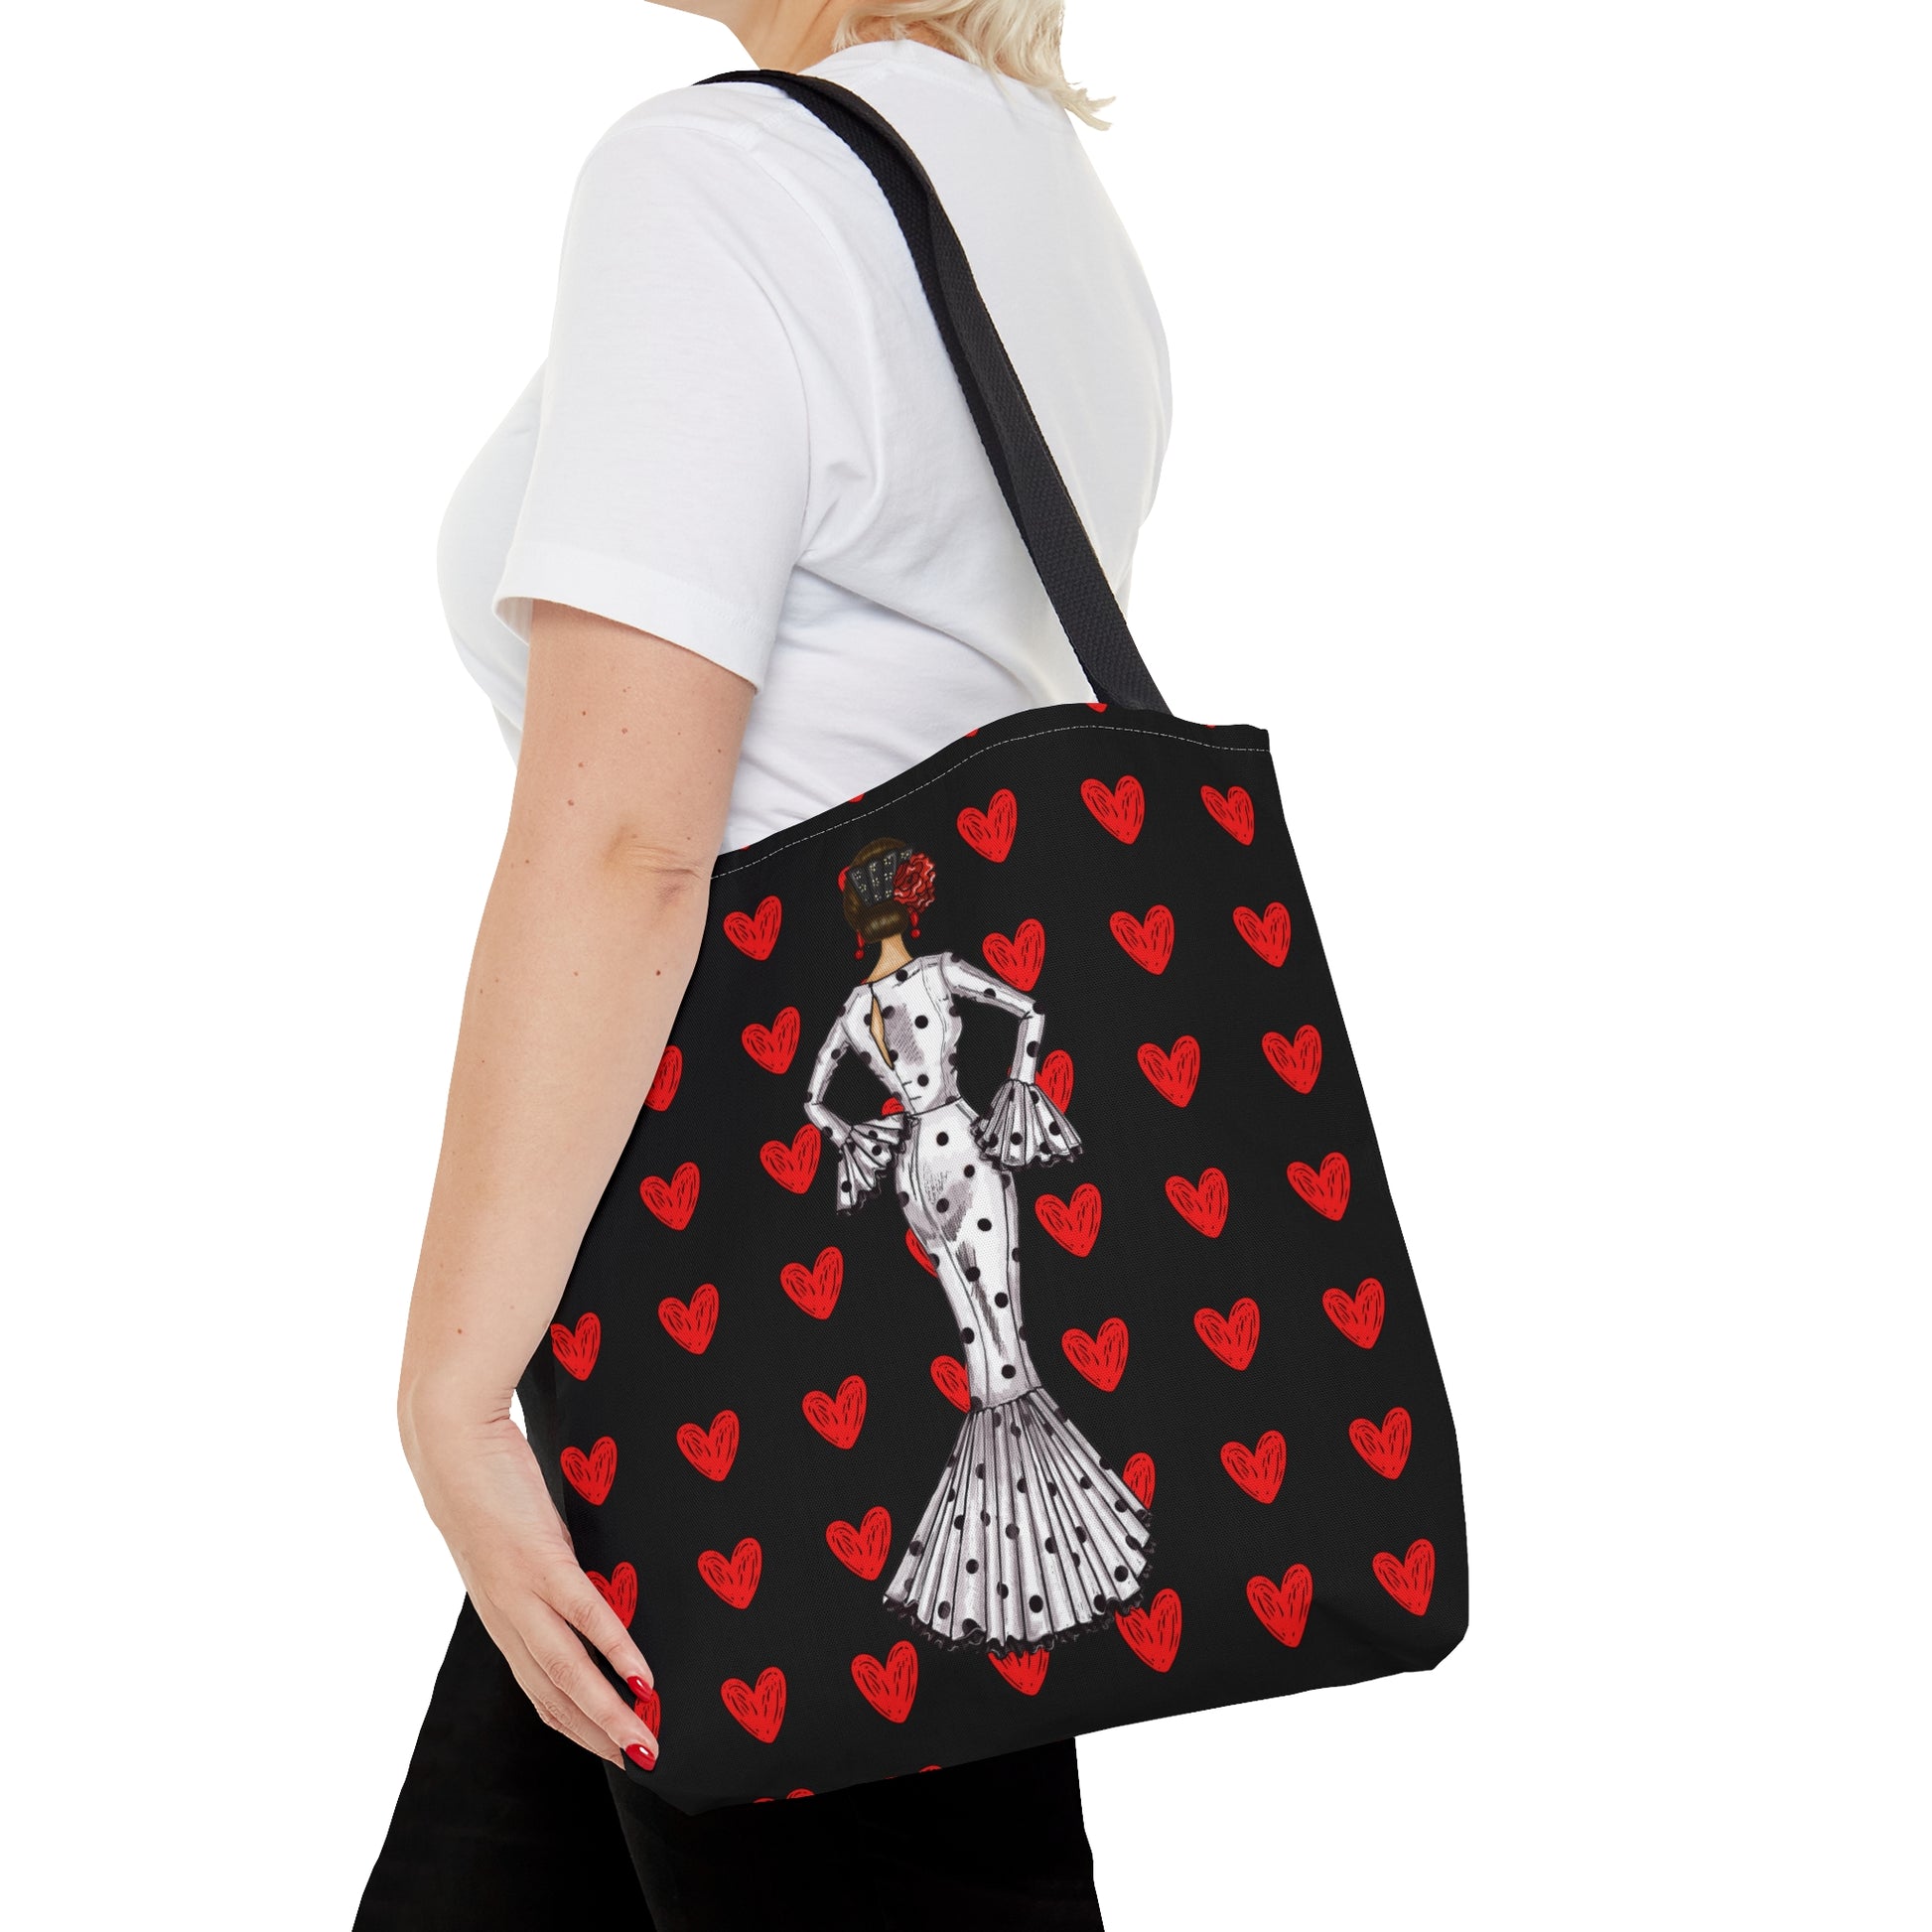 a woman carrying a dalmatian bag with hearts on it